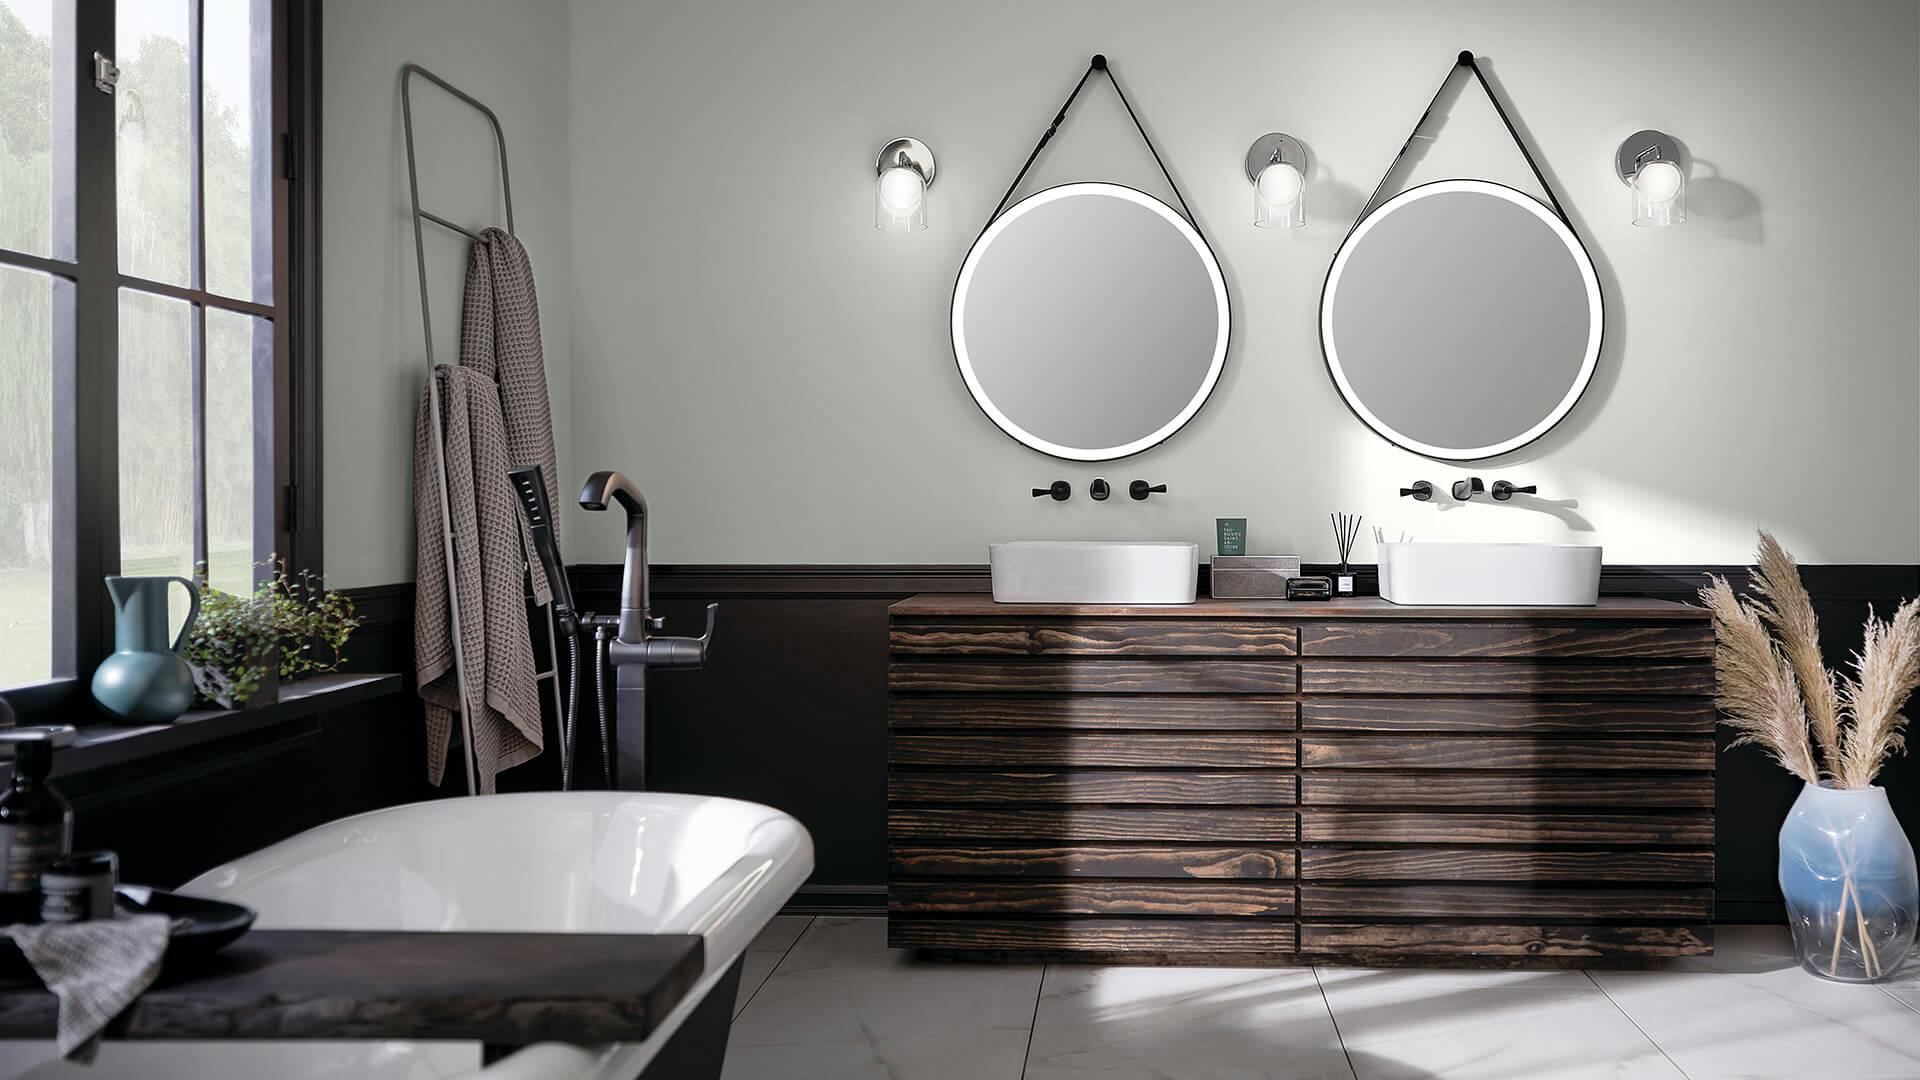 Bathroom with energetic brilliance mood, all lights on at daytime.